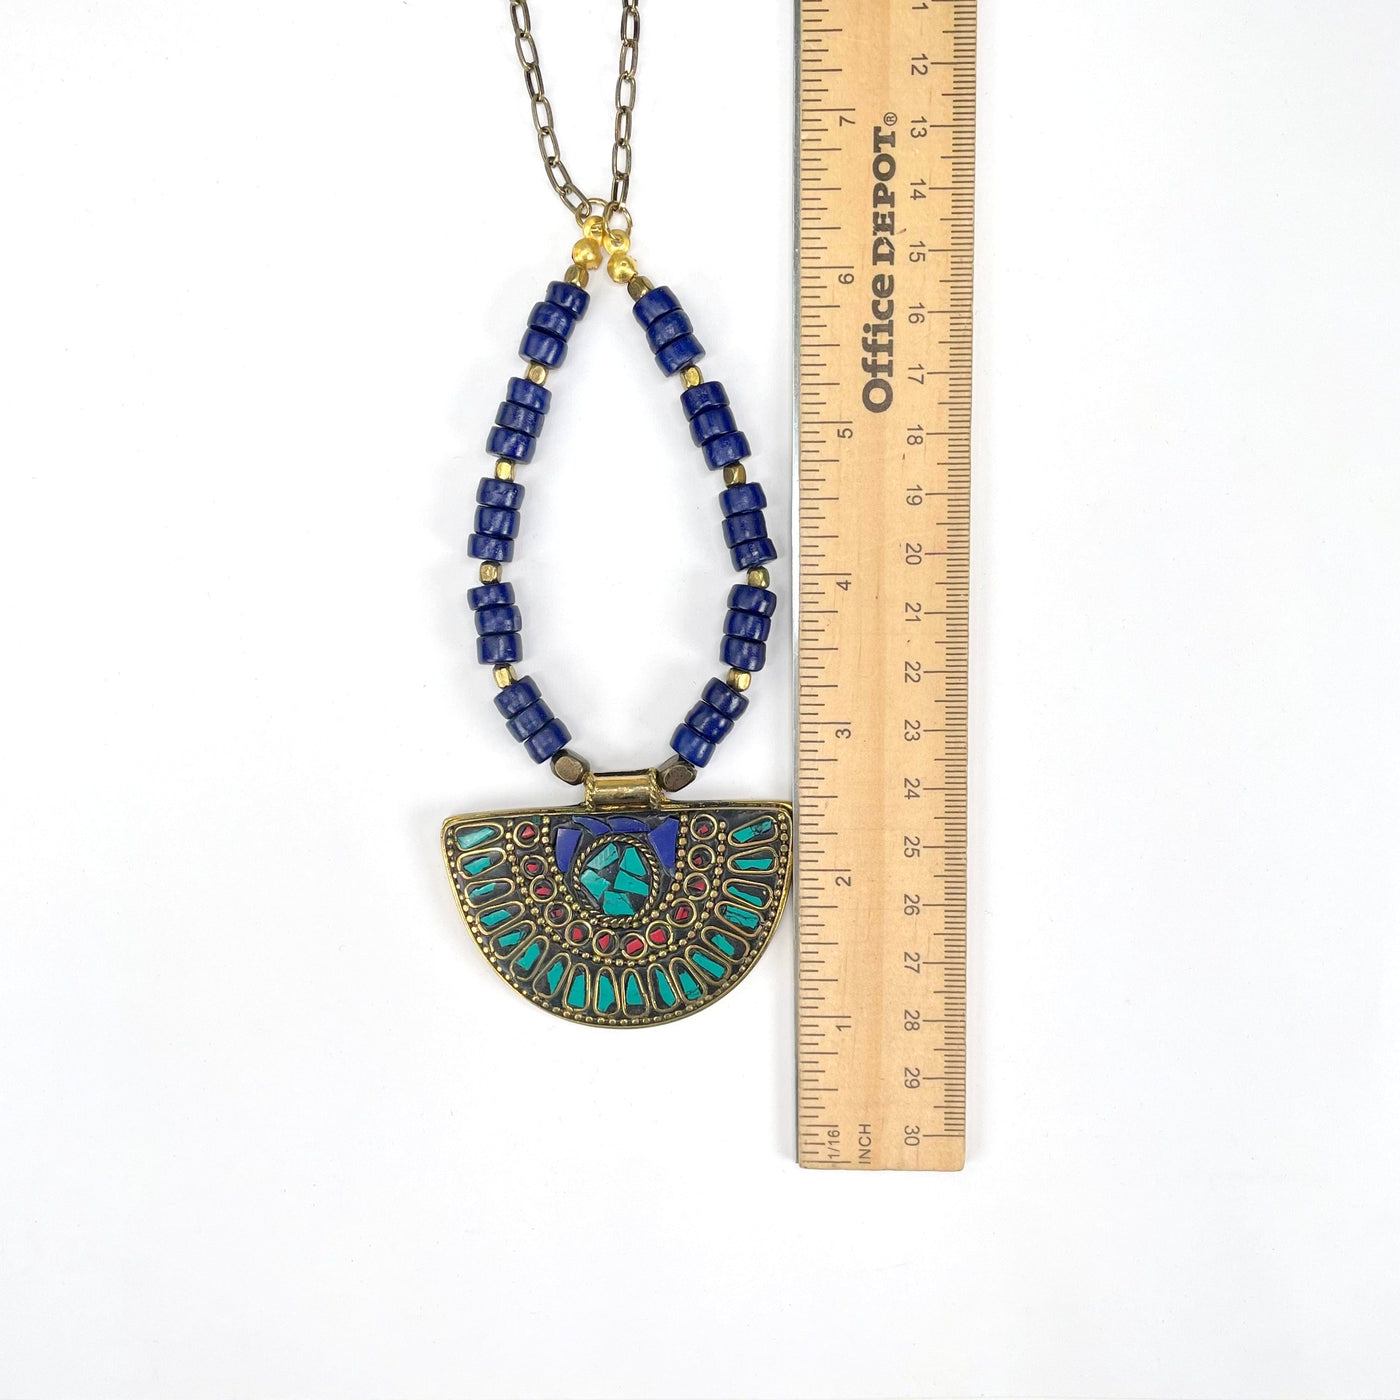 pendant and beaded portion of necklace with ruler for size reference